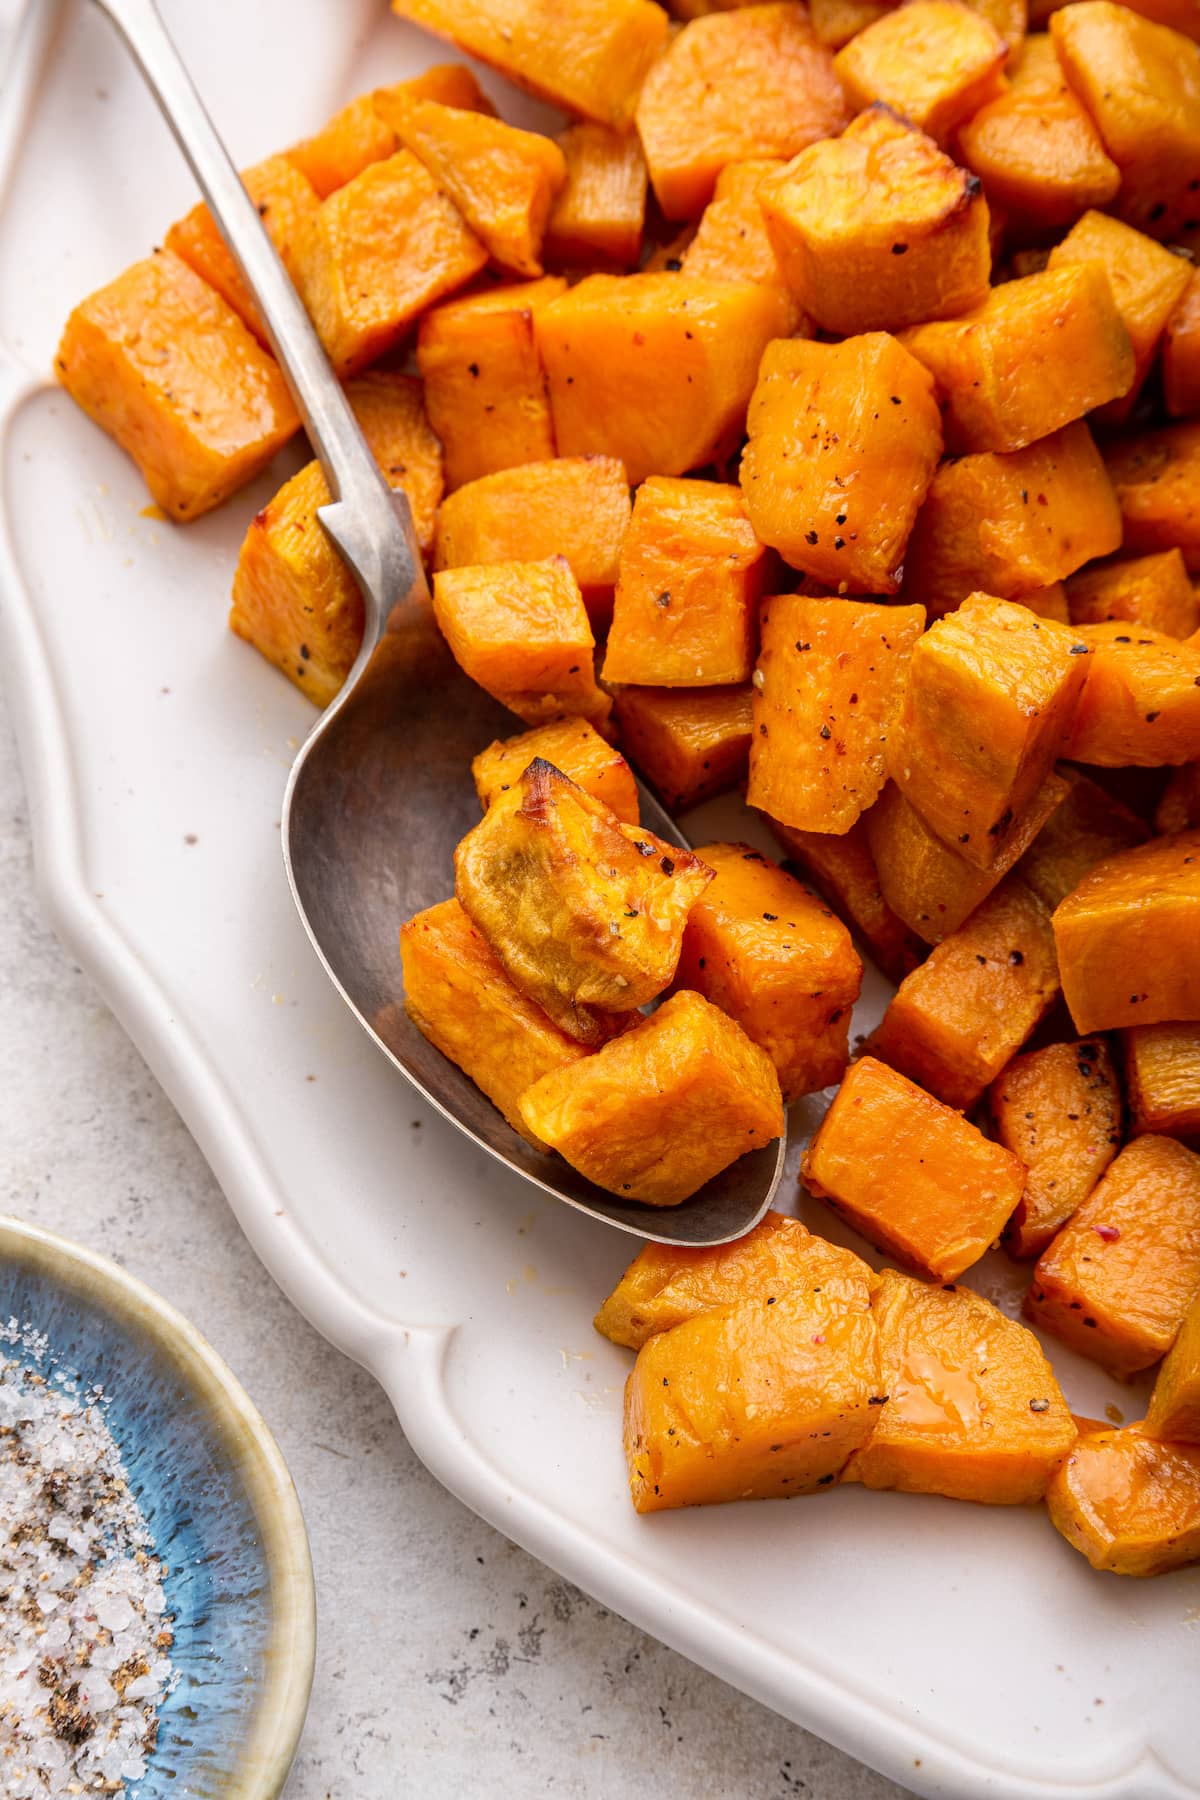 Cubed roasted sweet potatoes on a plate with a metal spoon holding a few of them.